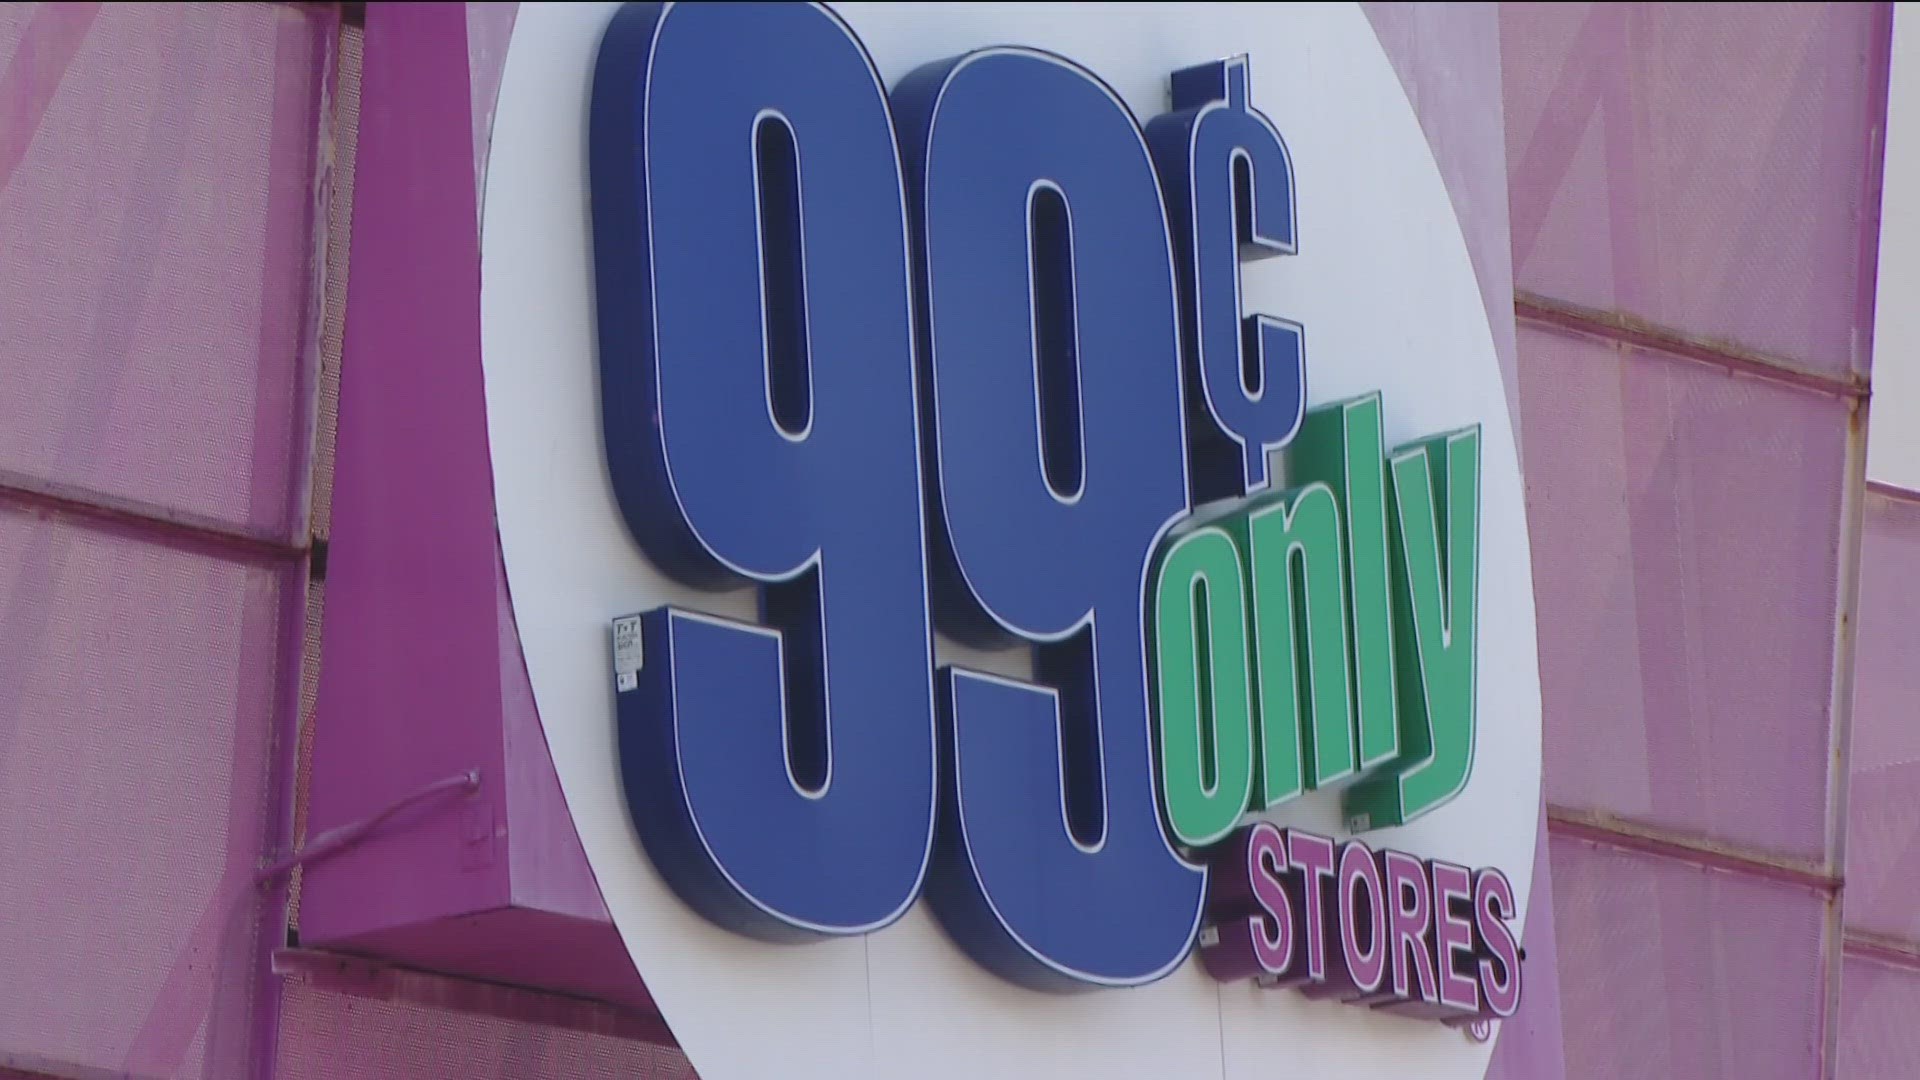 After nearly 42 years in business, one of America's favorite discount stores will close all locations in California, Arizona, Nevada and Texas.